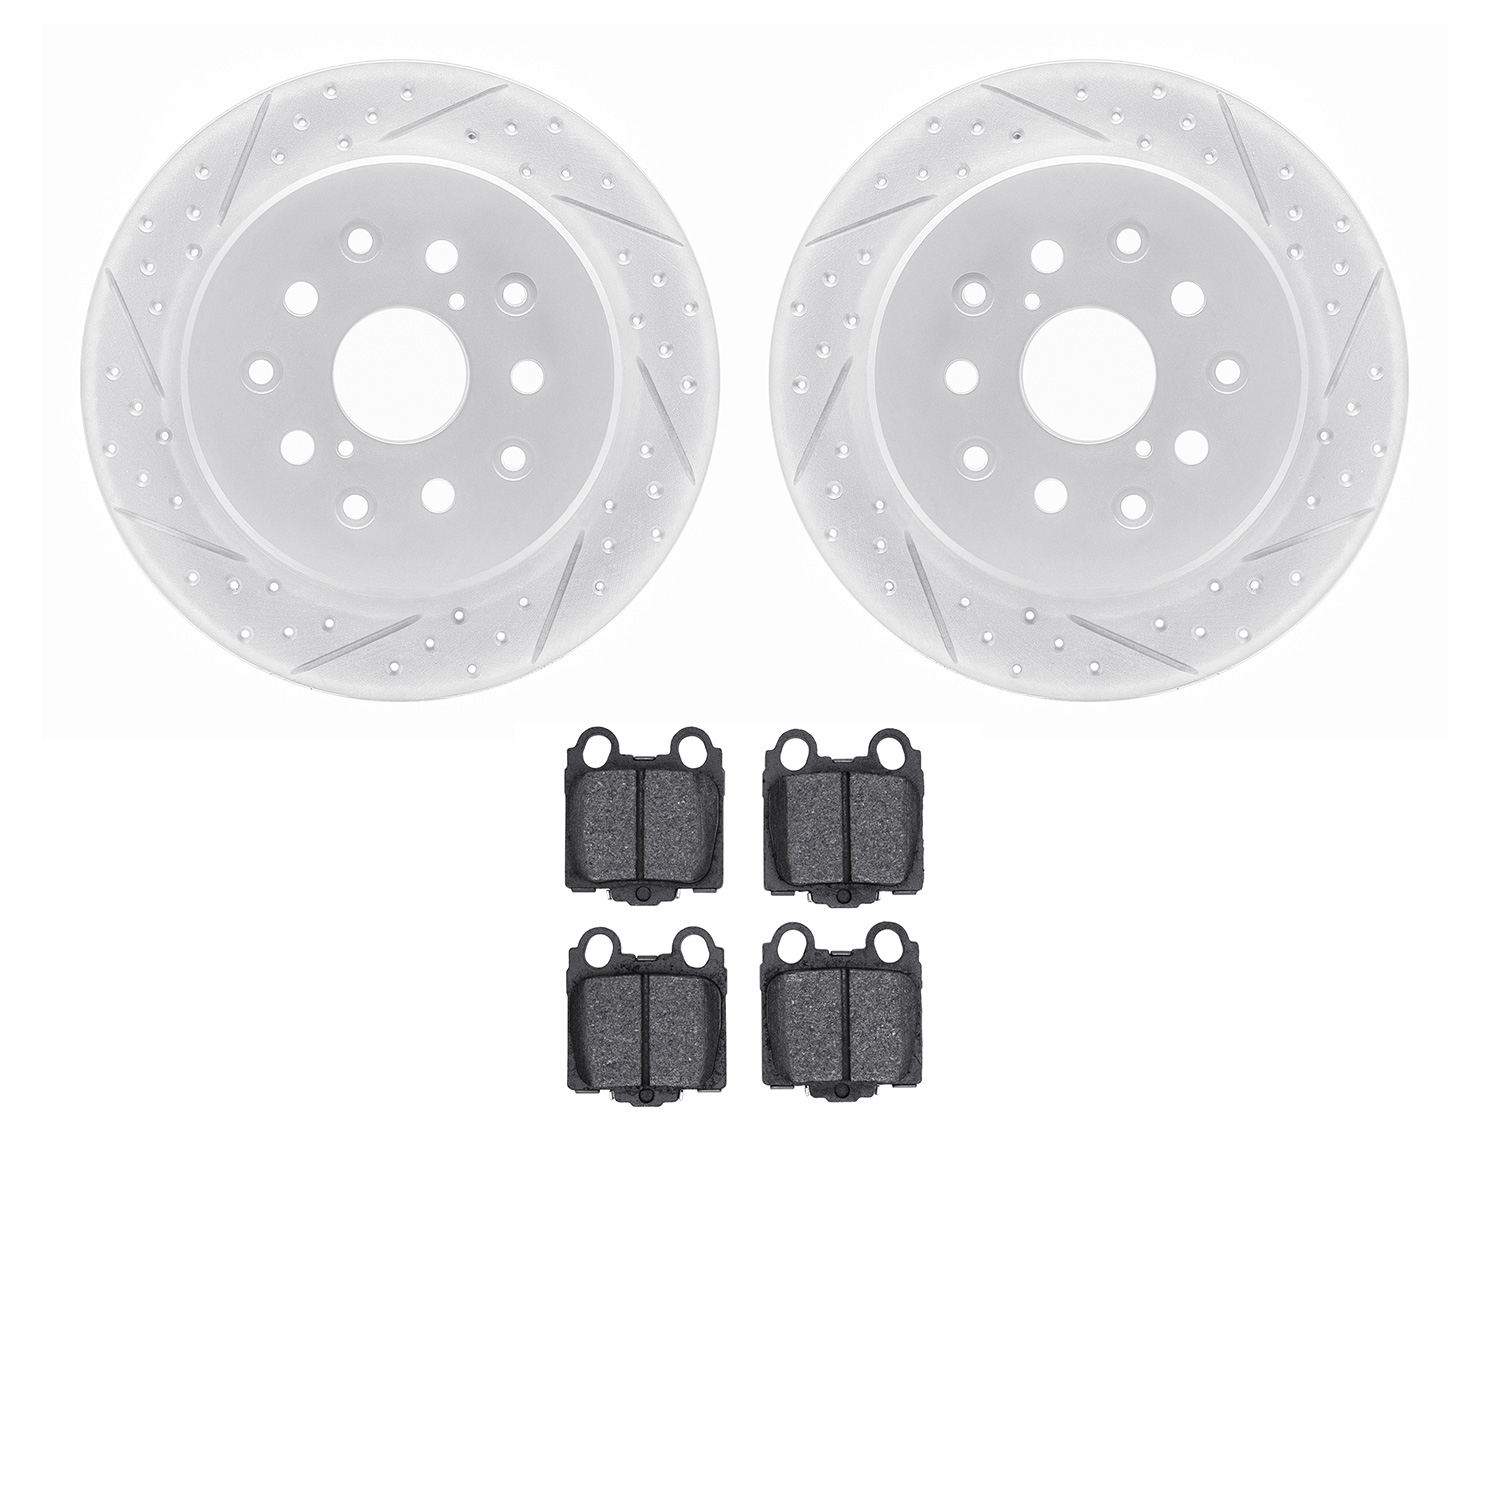 2502-75005 Geoperformance Drilled/Slotted Rotors w/5000 Advanced Brake Pads Kit, 1998-2010 Lexus/Toyota/Scion, Position: Rear